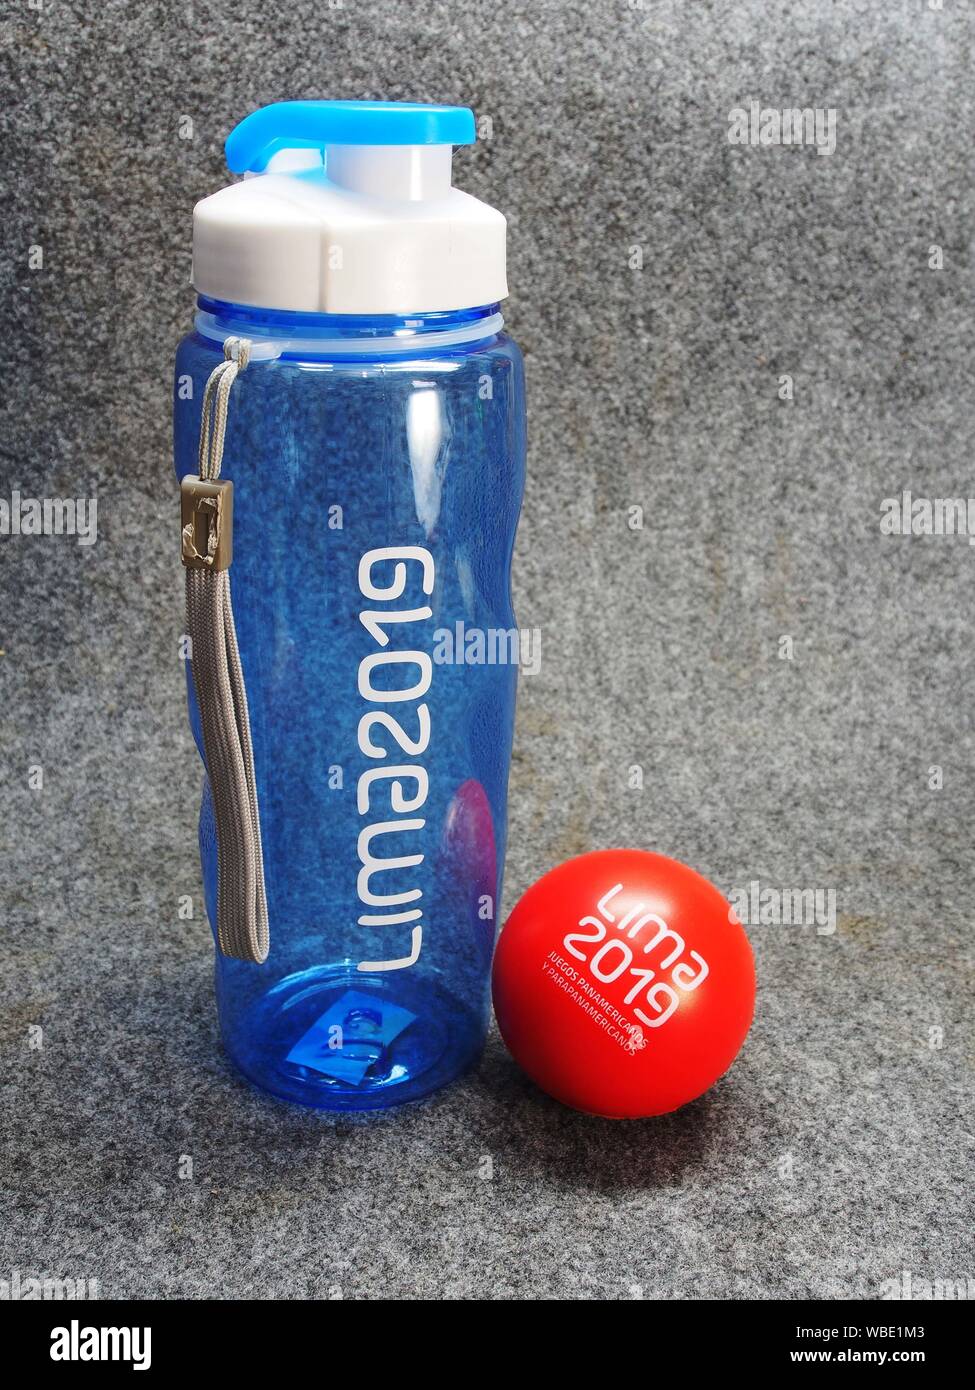 Bottle, and red rubber ball, souvenirs of the   Lima 2019 Pan American and Parapan American Games Stock Photo